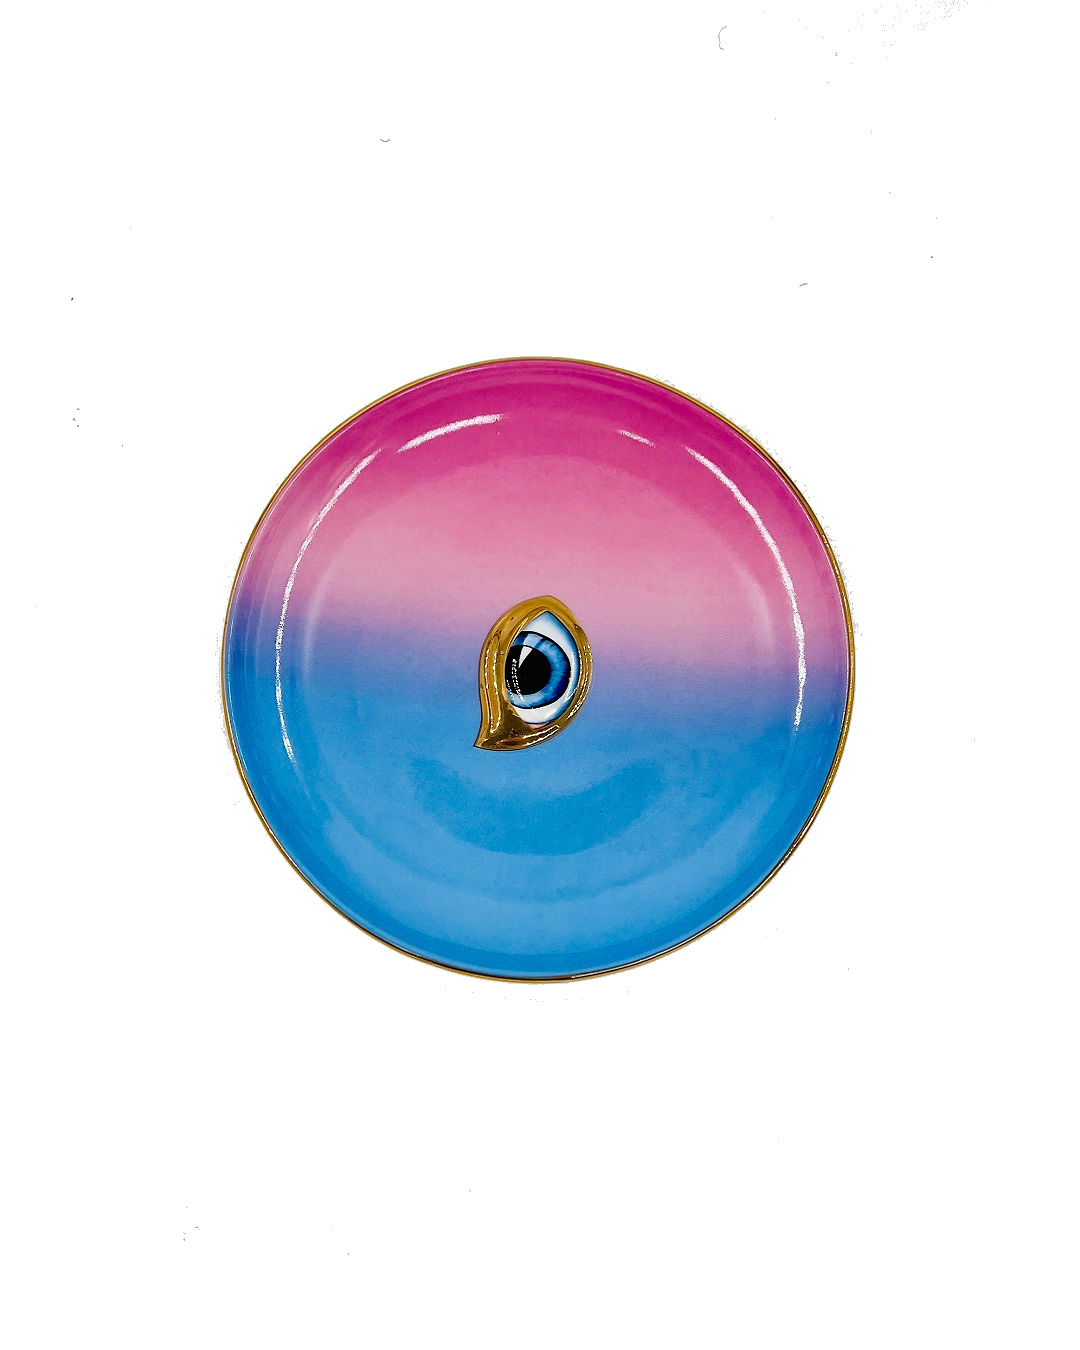 Pink and blue eye plate